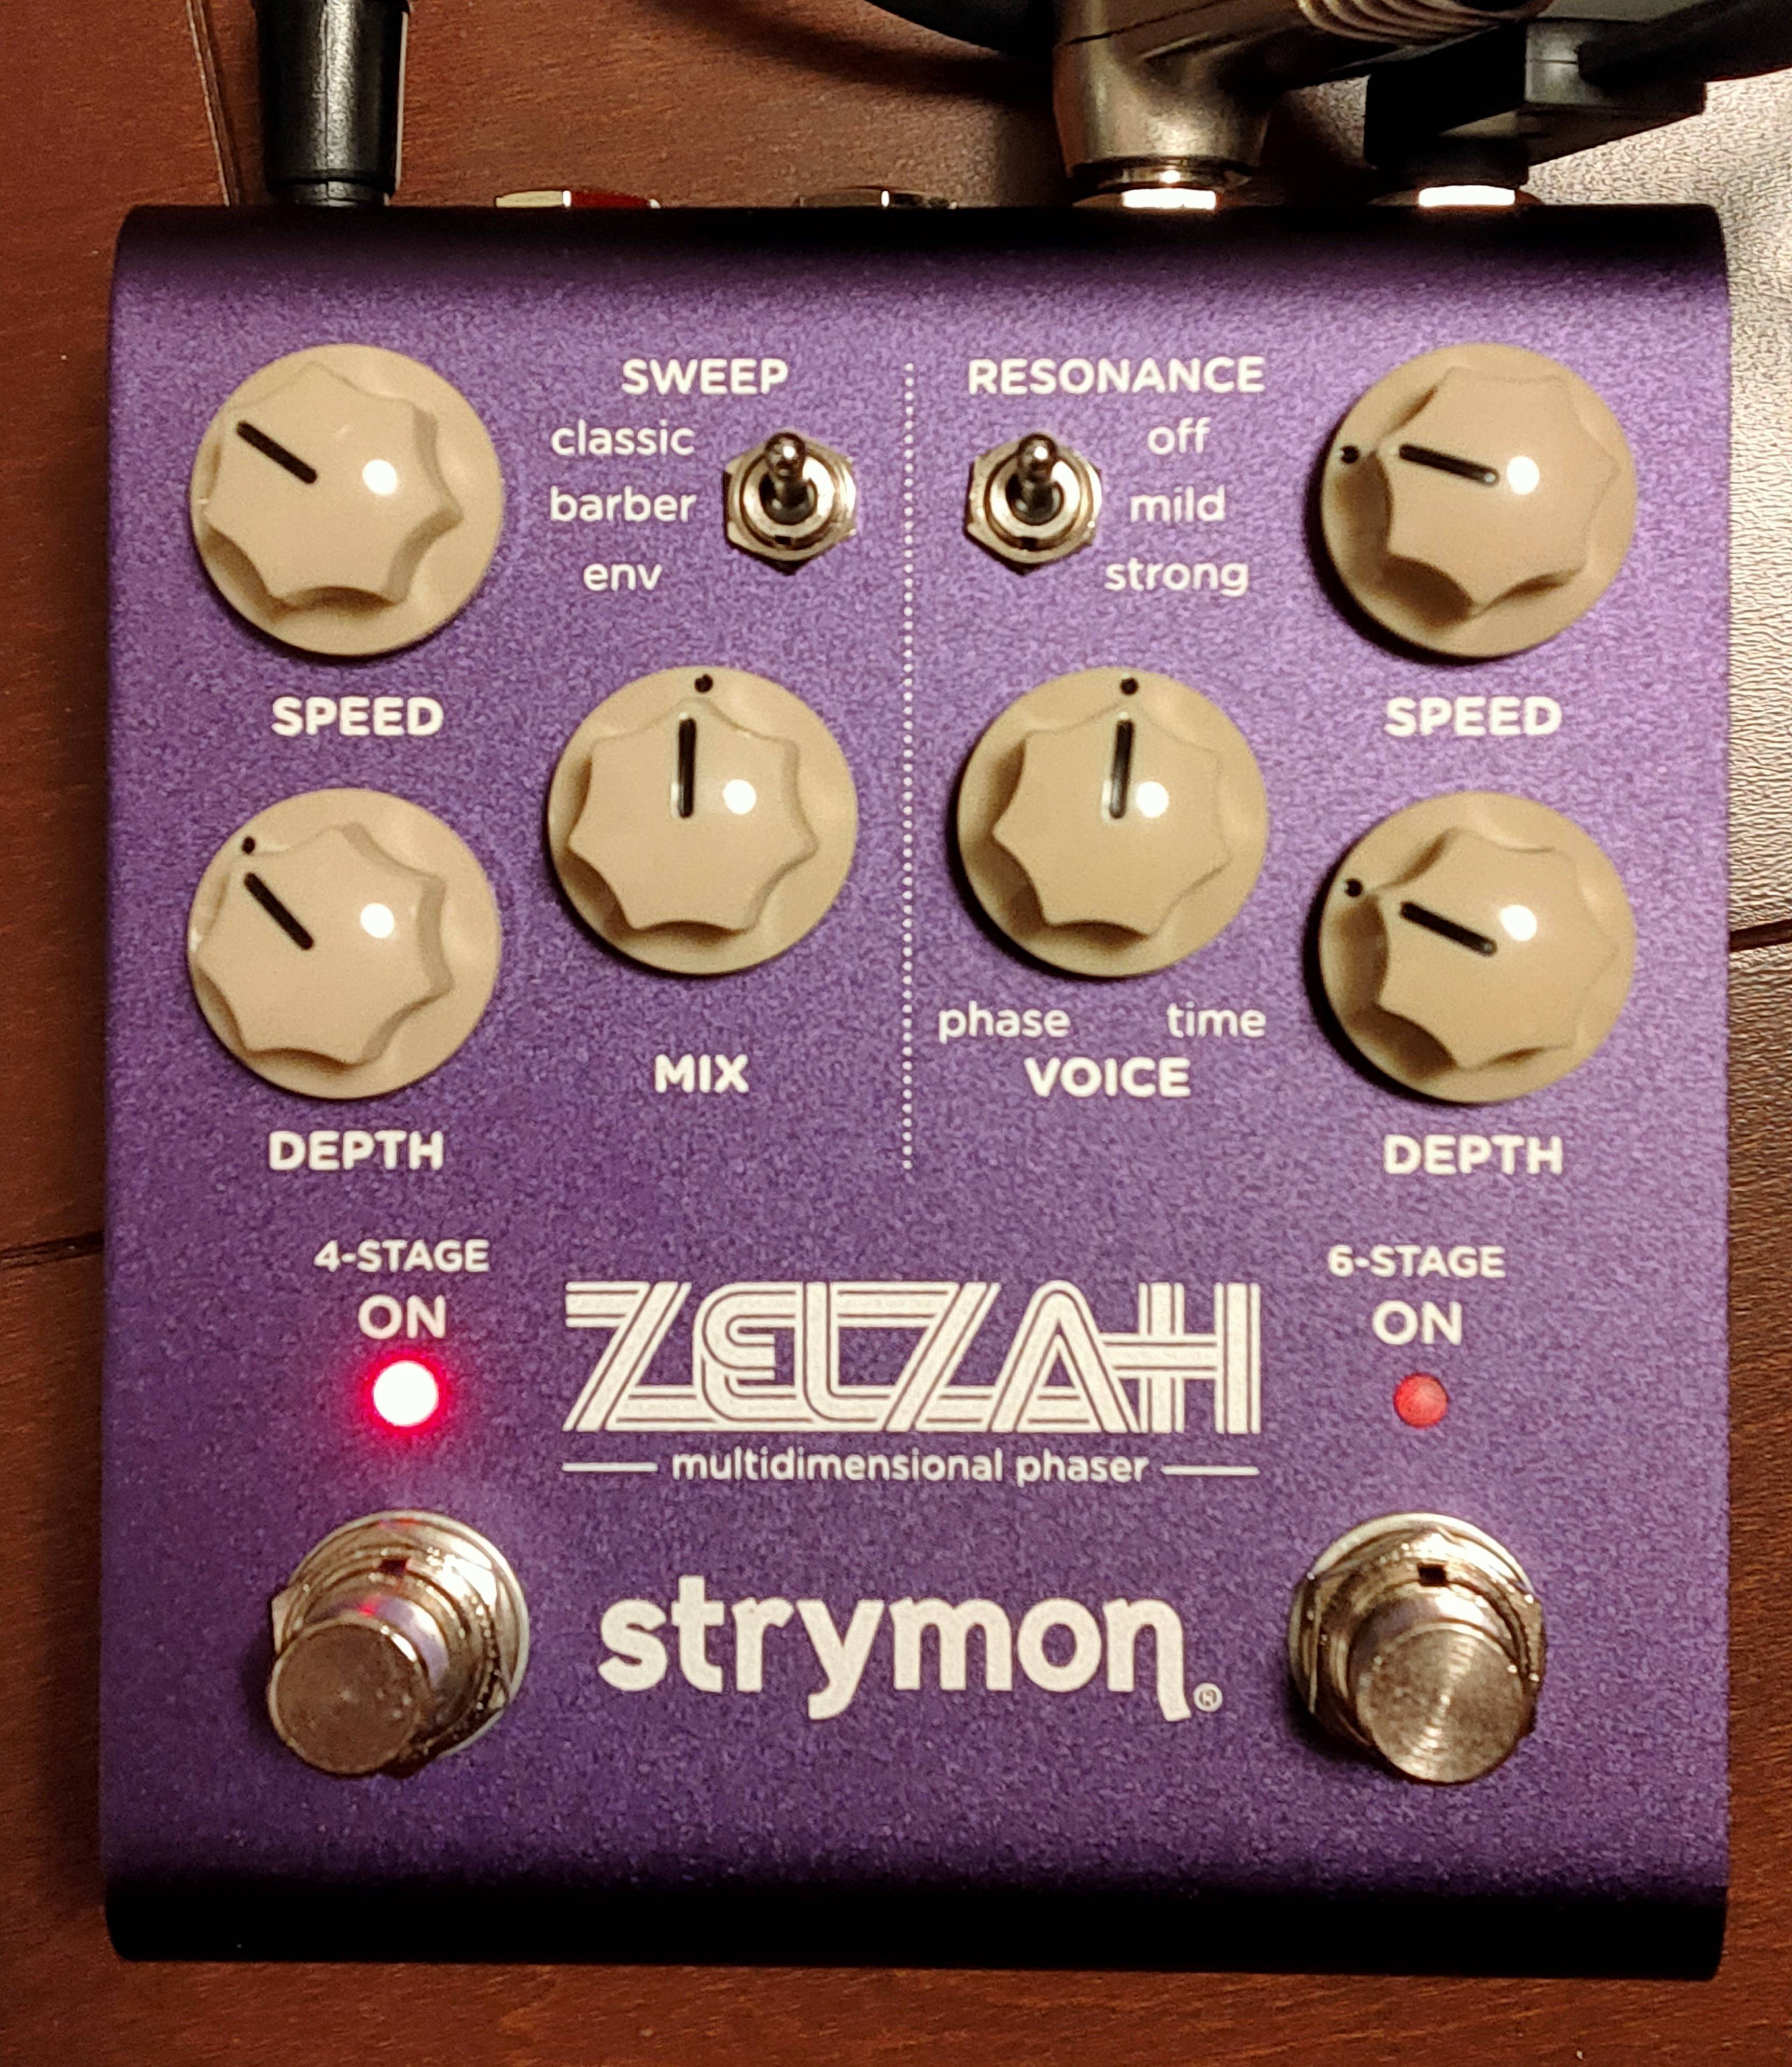 The melody at night, with you Strymon / ZELZAH